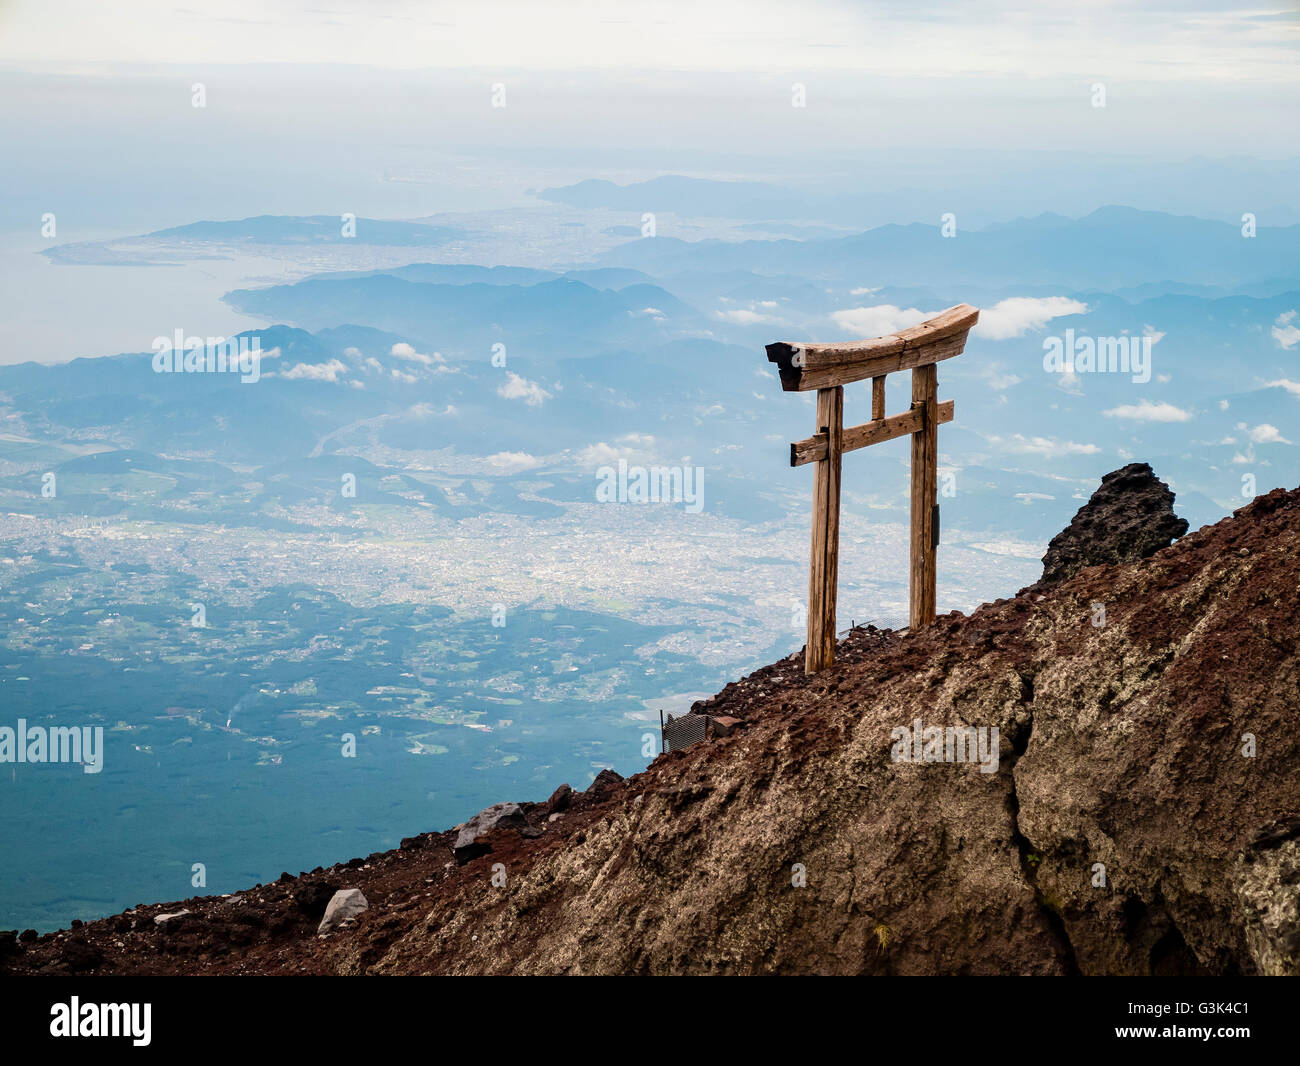 Hiking in the famous Mount Fuji, Japan Stock Photo